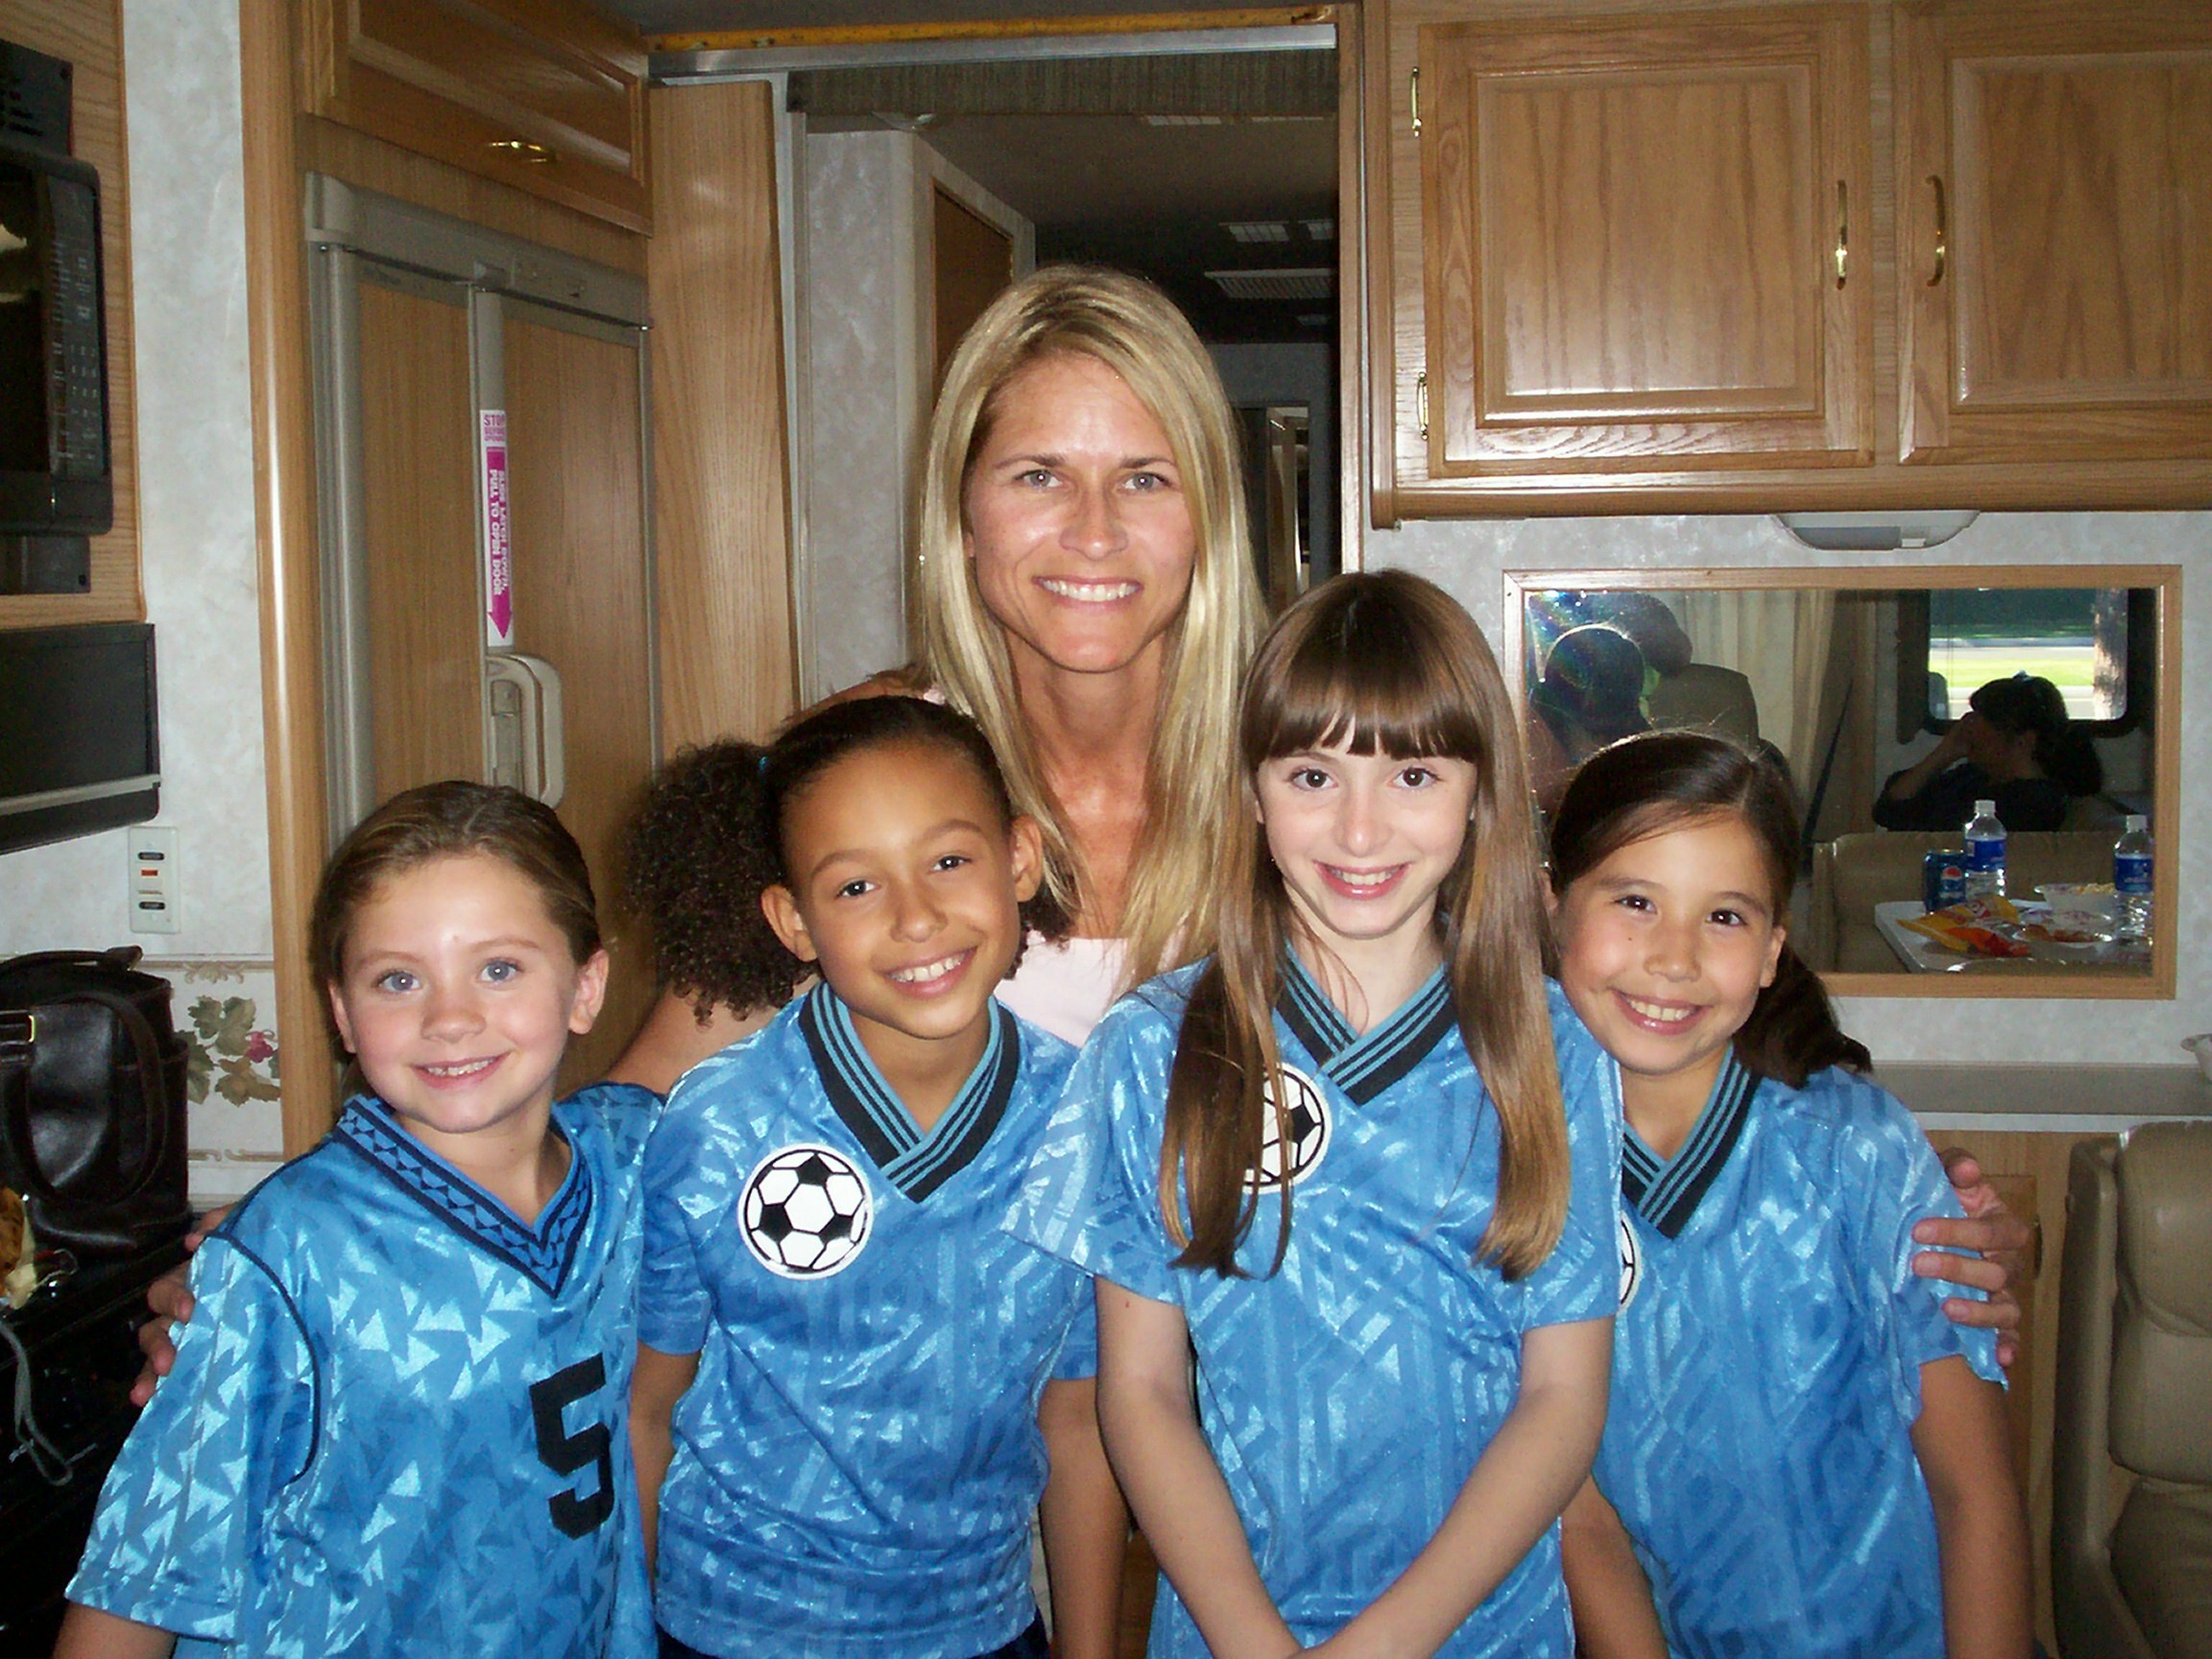 Sami and friends hanging out in the trailer on the Toyota set